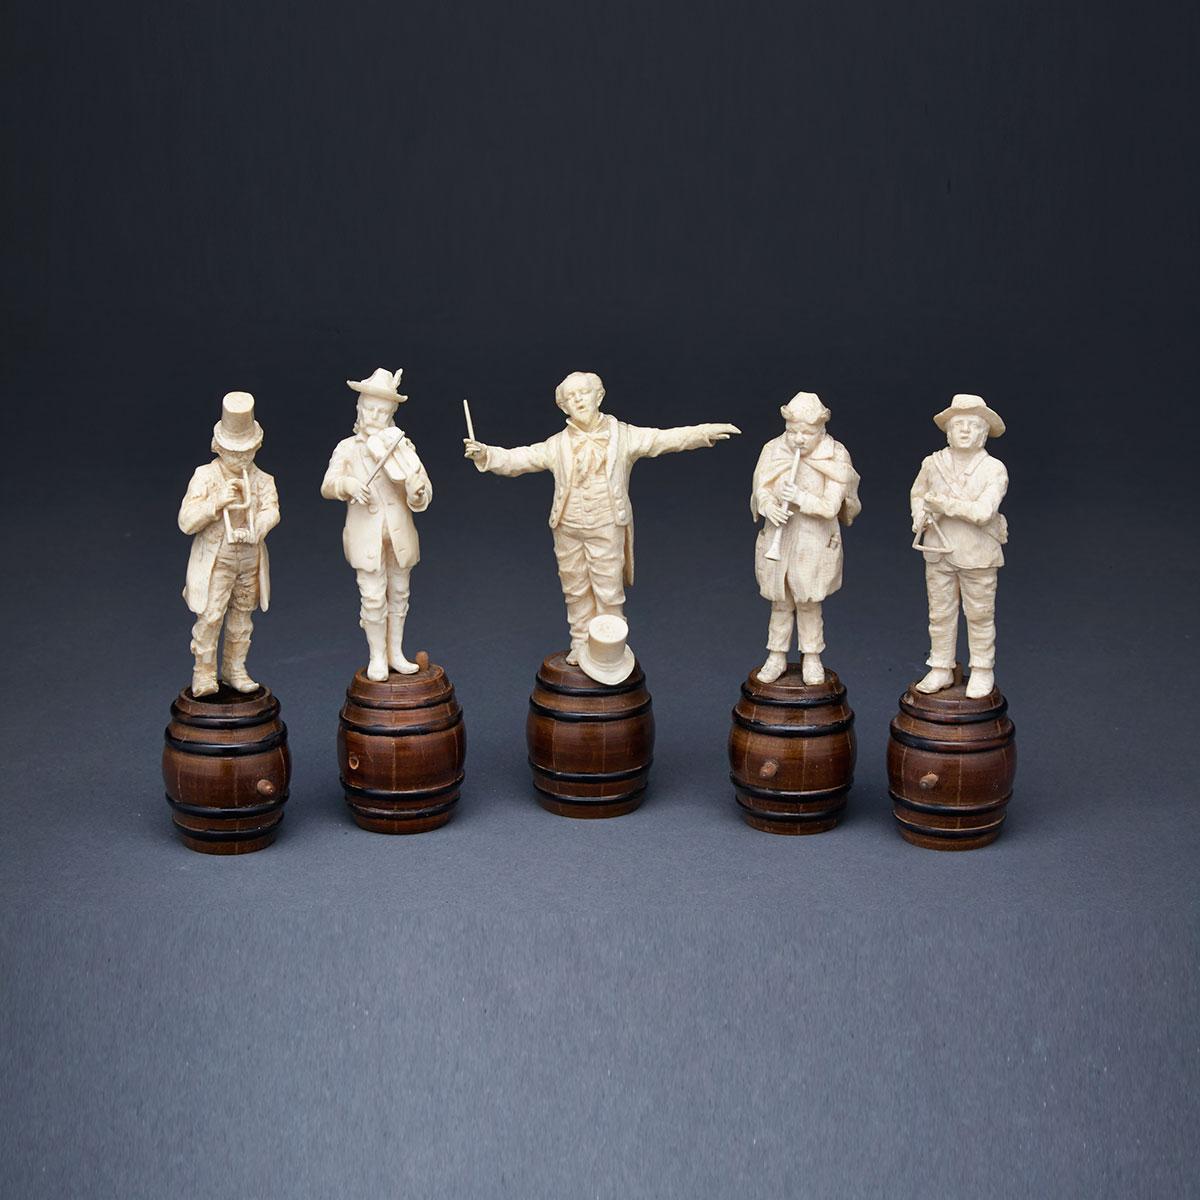 Set of Five South German Carved Ivory Figures of Musicians, 19th century